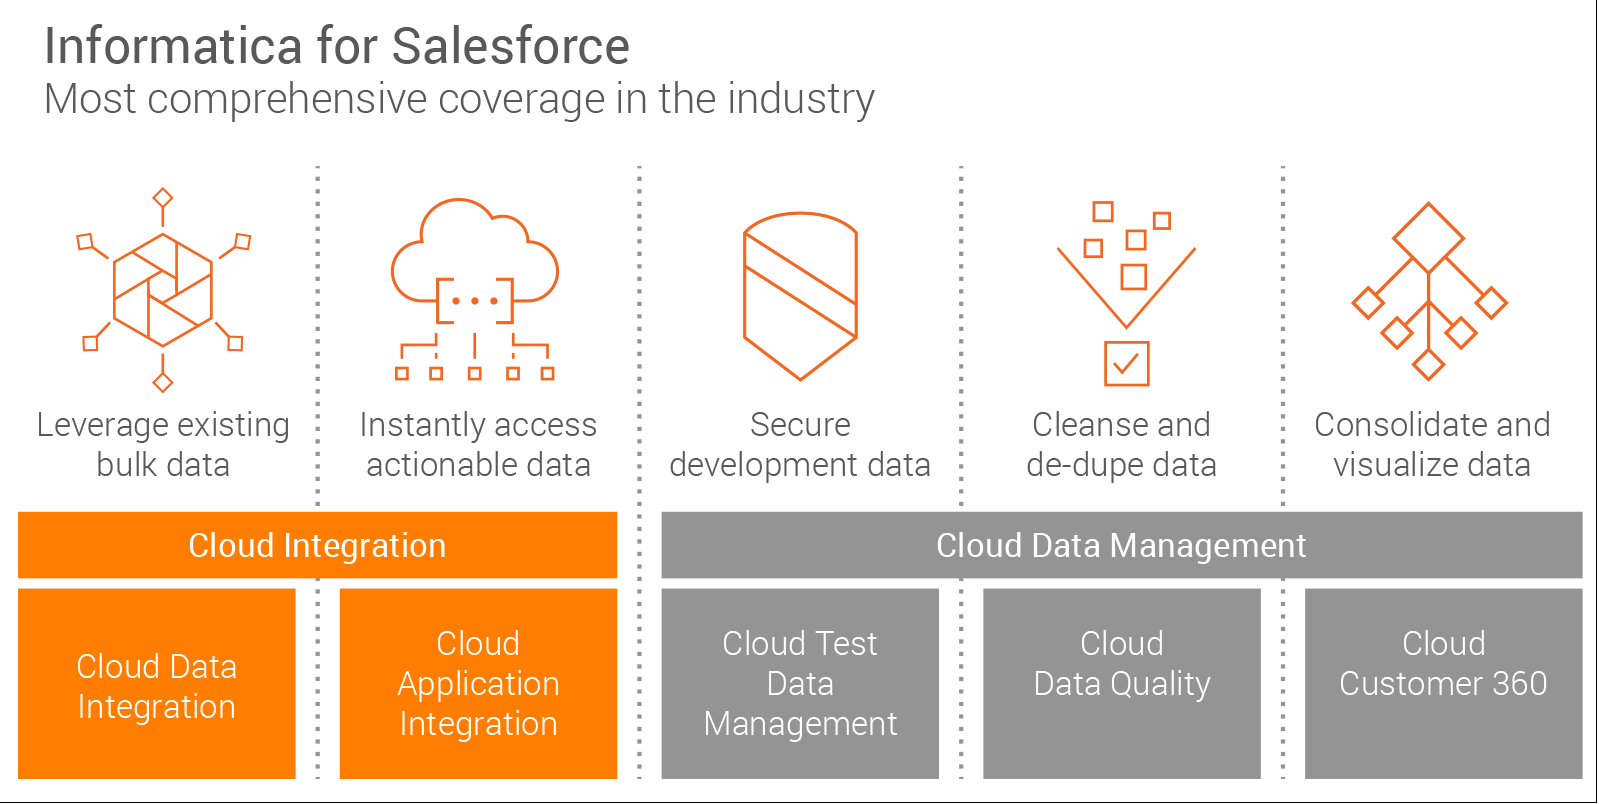 Informatica cloud integrtion and data management for Salesforce